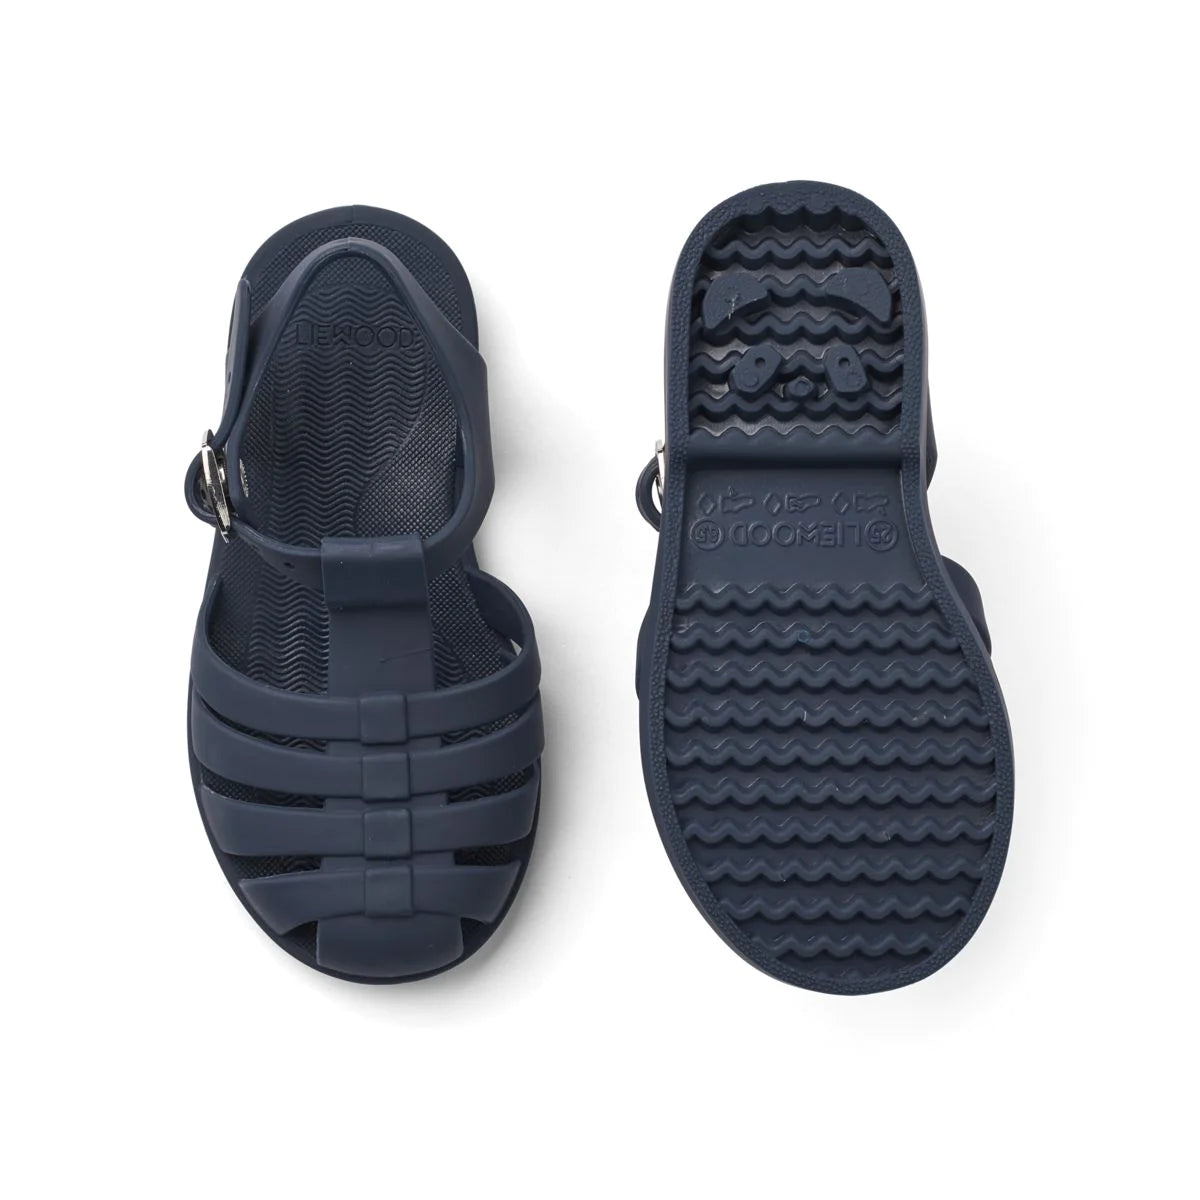 BRE SANDALS - CLASSIC NAVY, LIEWOOD